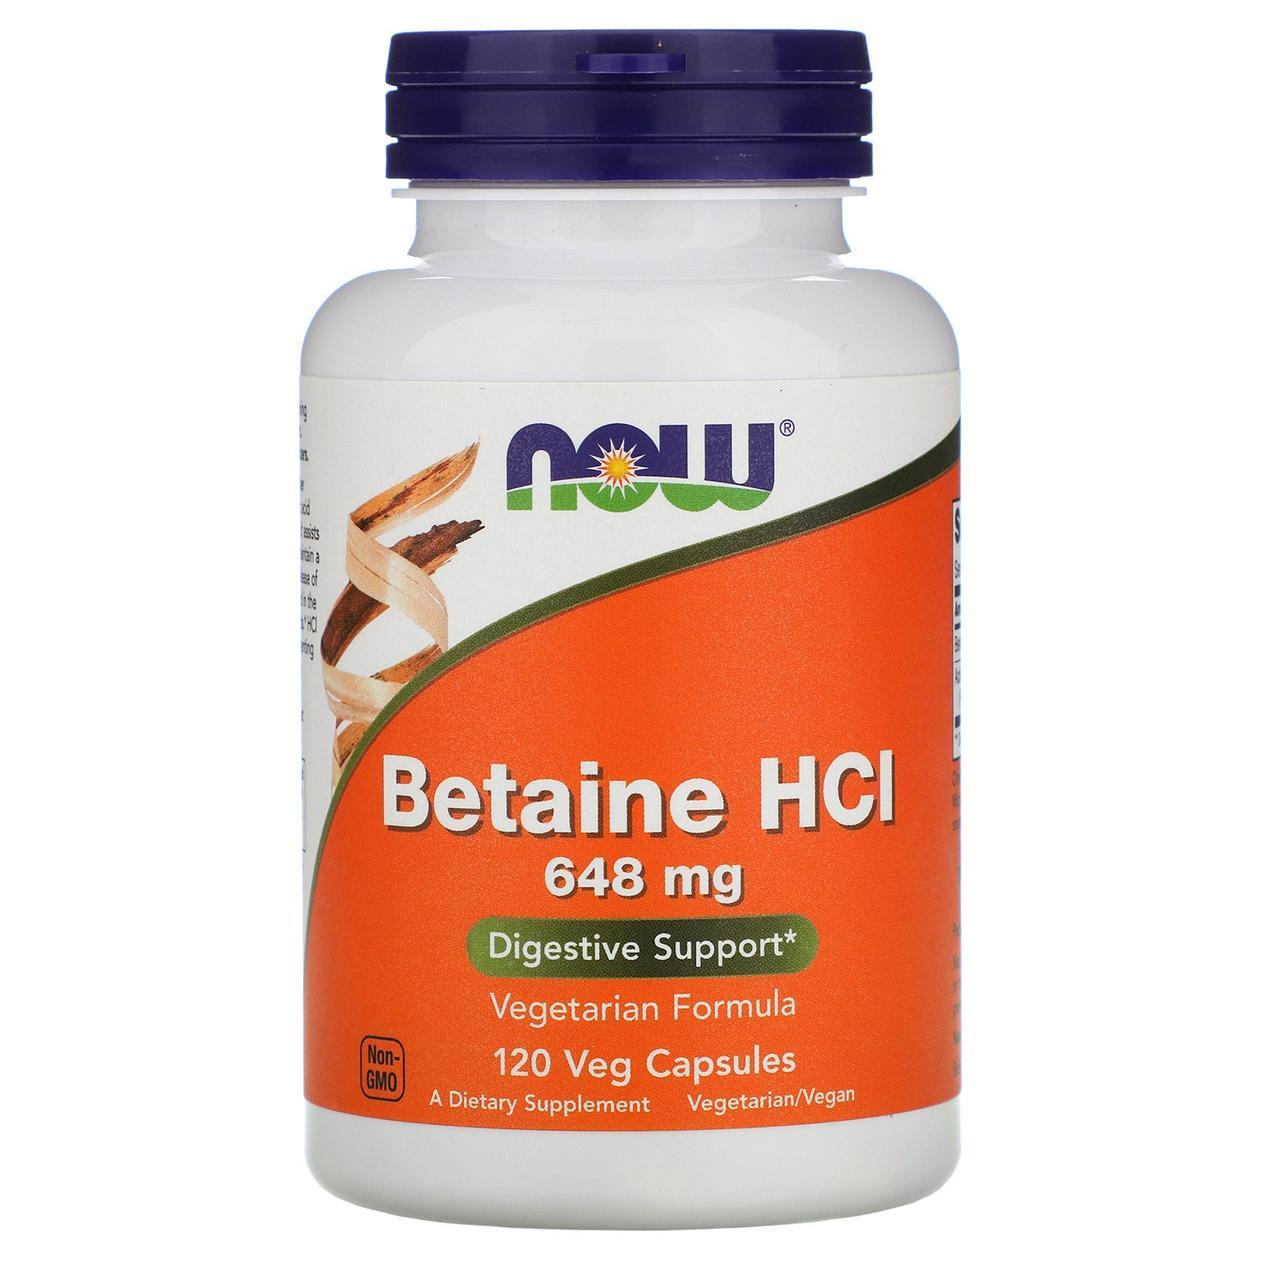 Бетаина гидрохлорид NOW Foods Betaine HCL 648 mg 120 VCaps,  ml, Now. Special supplements. 